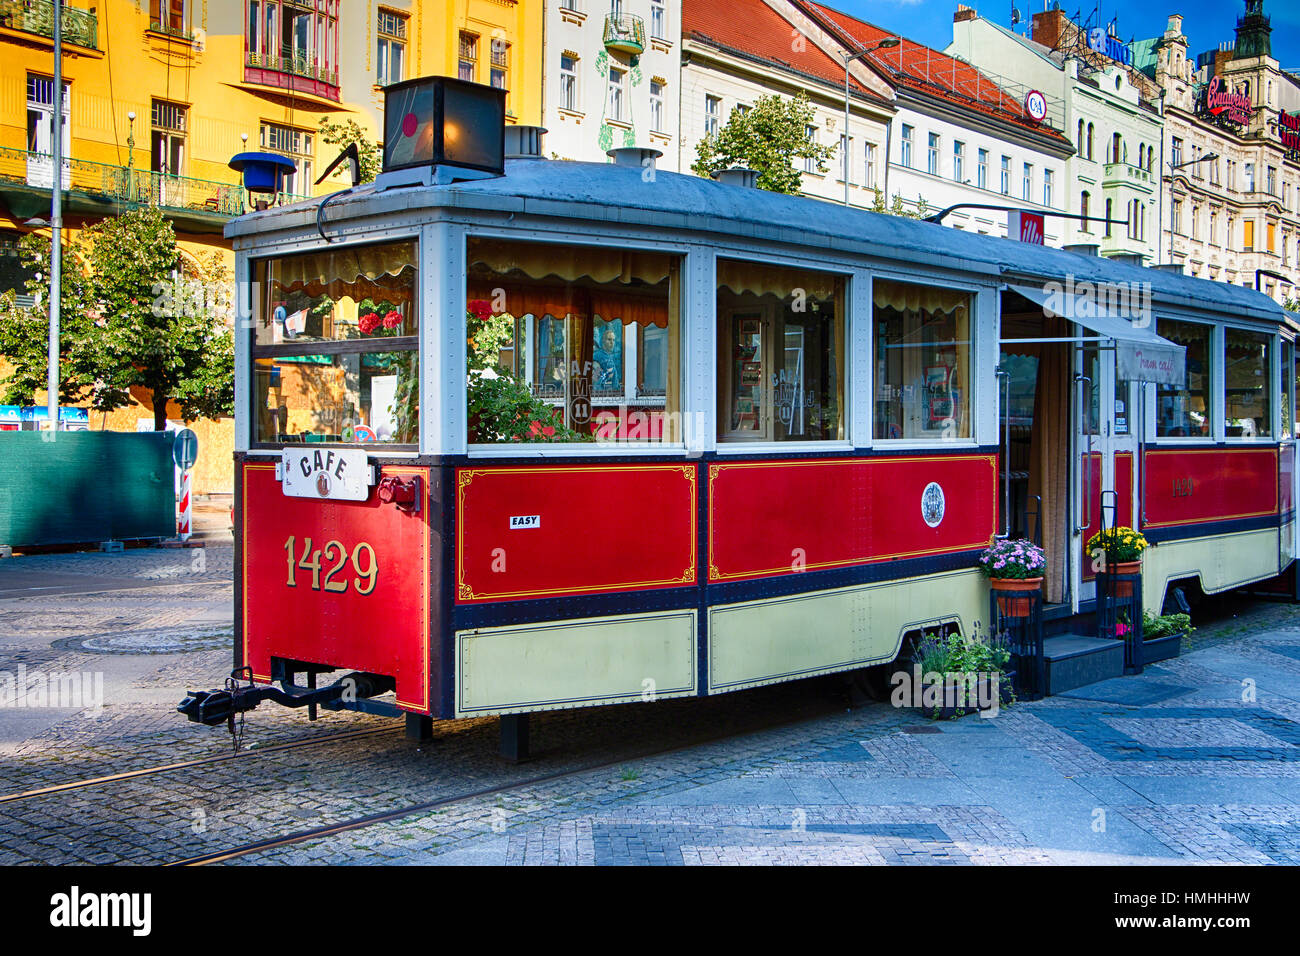 View of an Antique Tram Converted to a Cafe and Restaurant, Wenceslas Square, Parague, Czech Republic Stock Photo